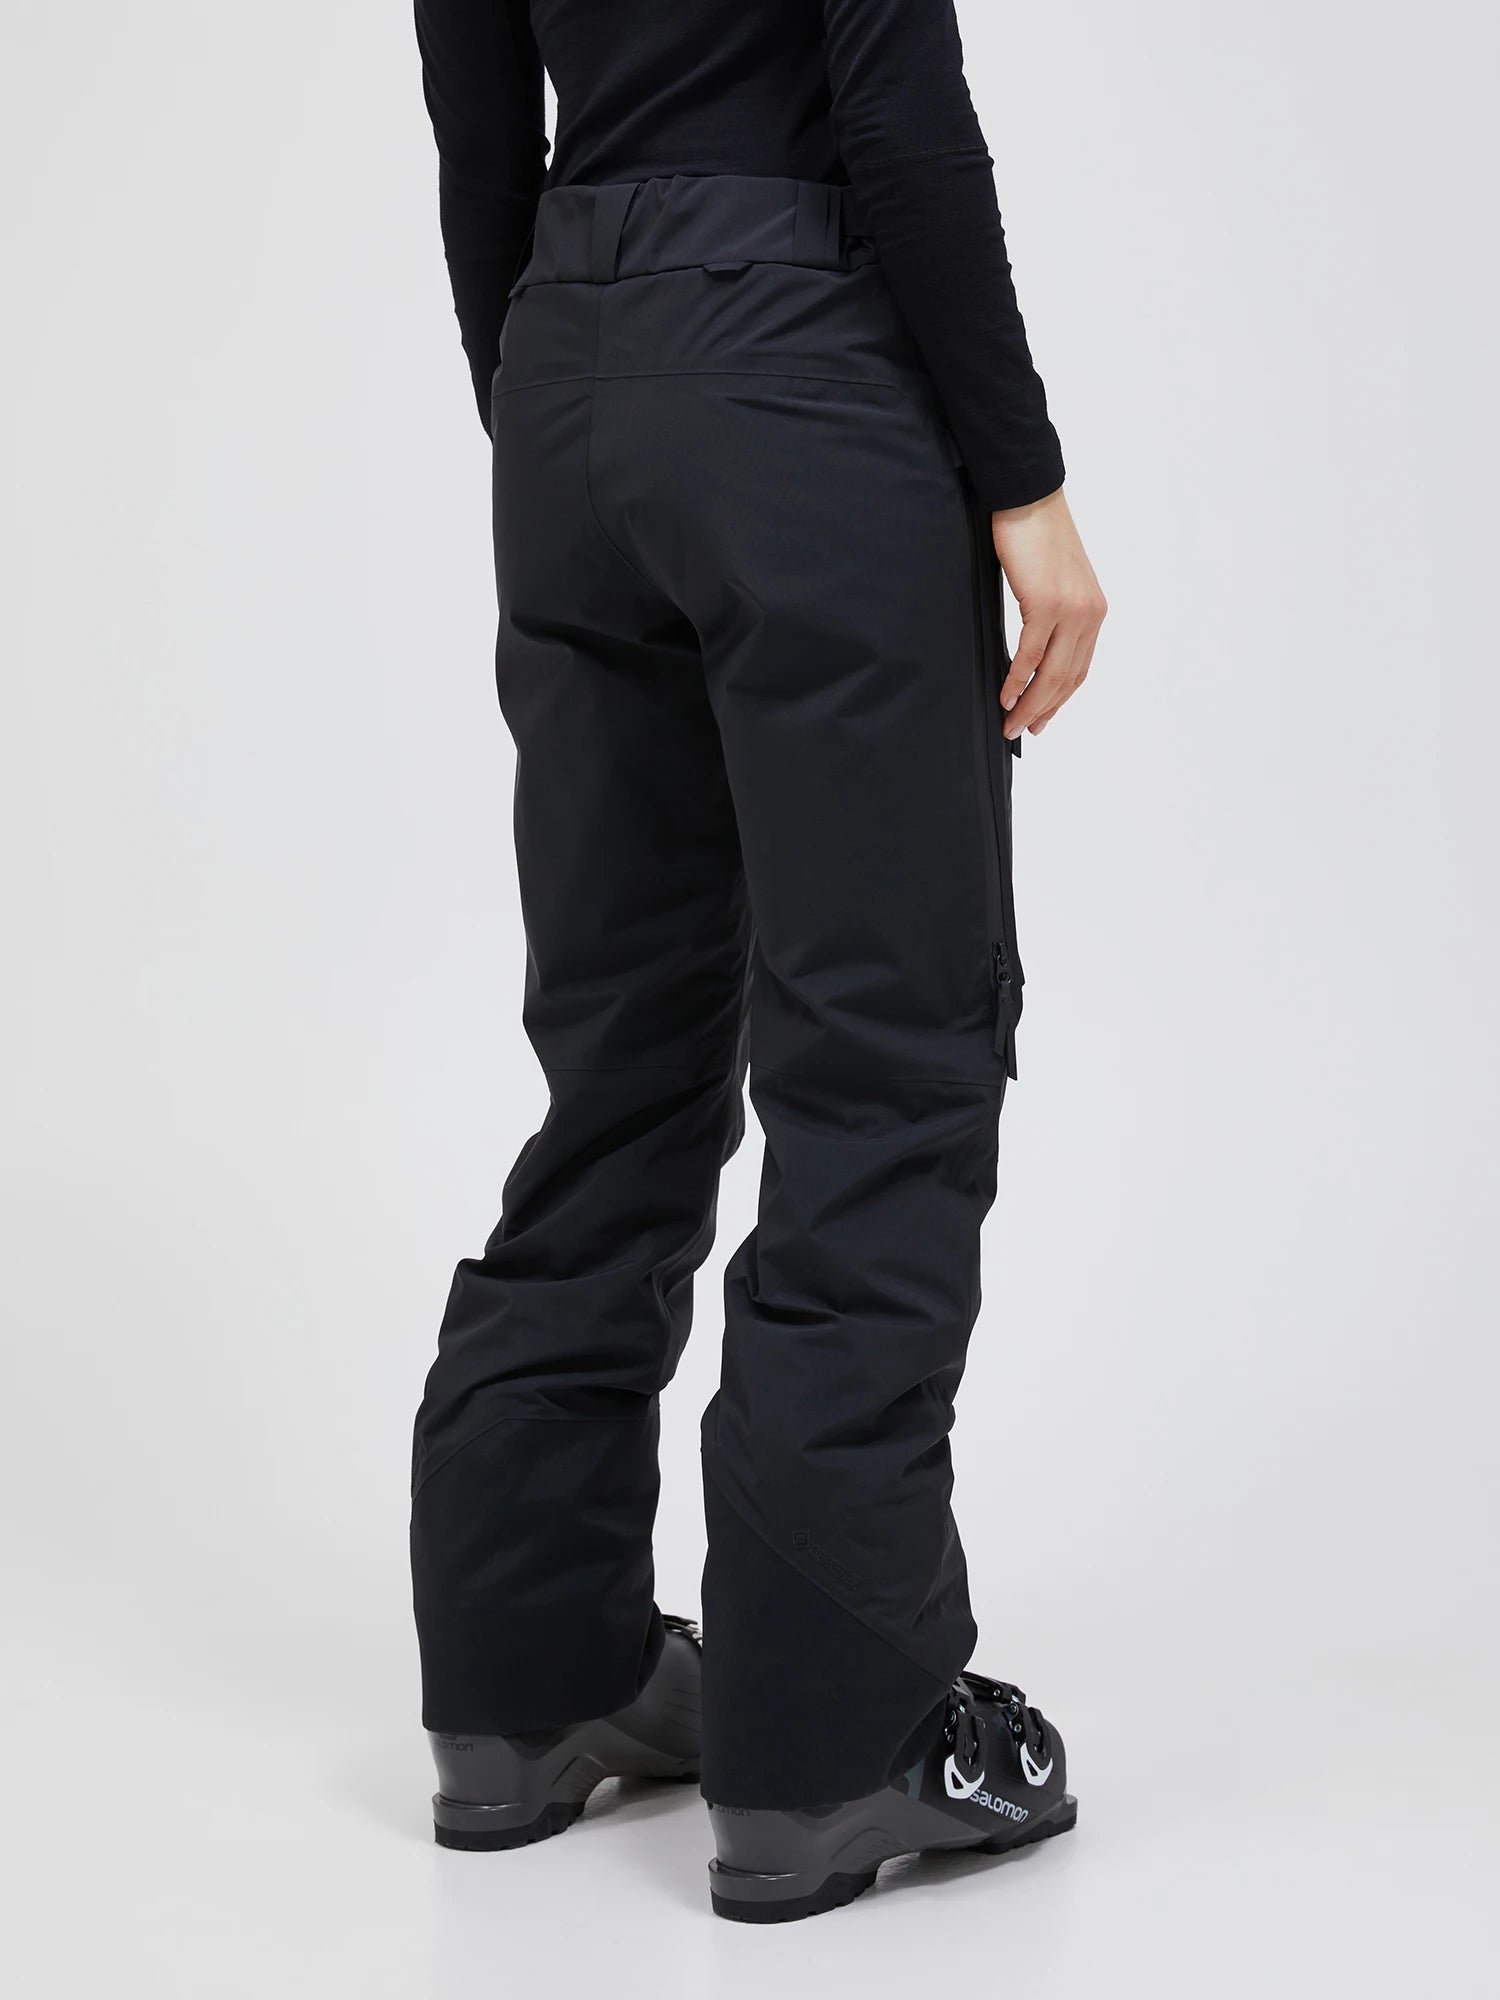 Alpine Gore-Tex 2L Insulated Shell Pants W